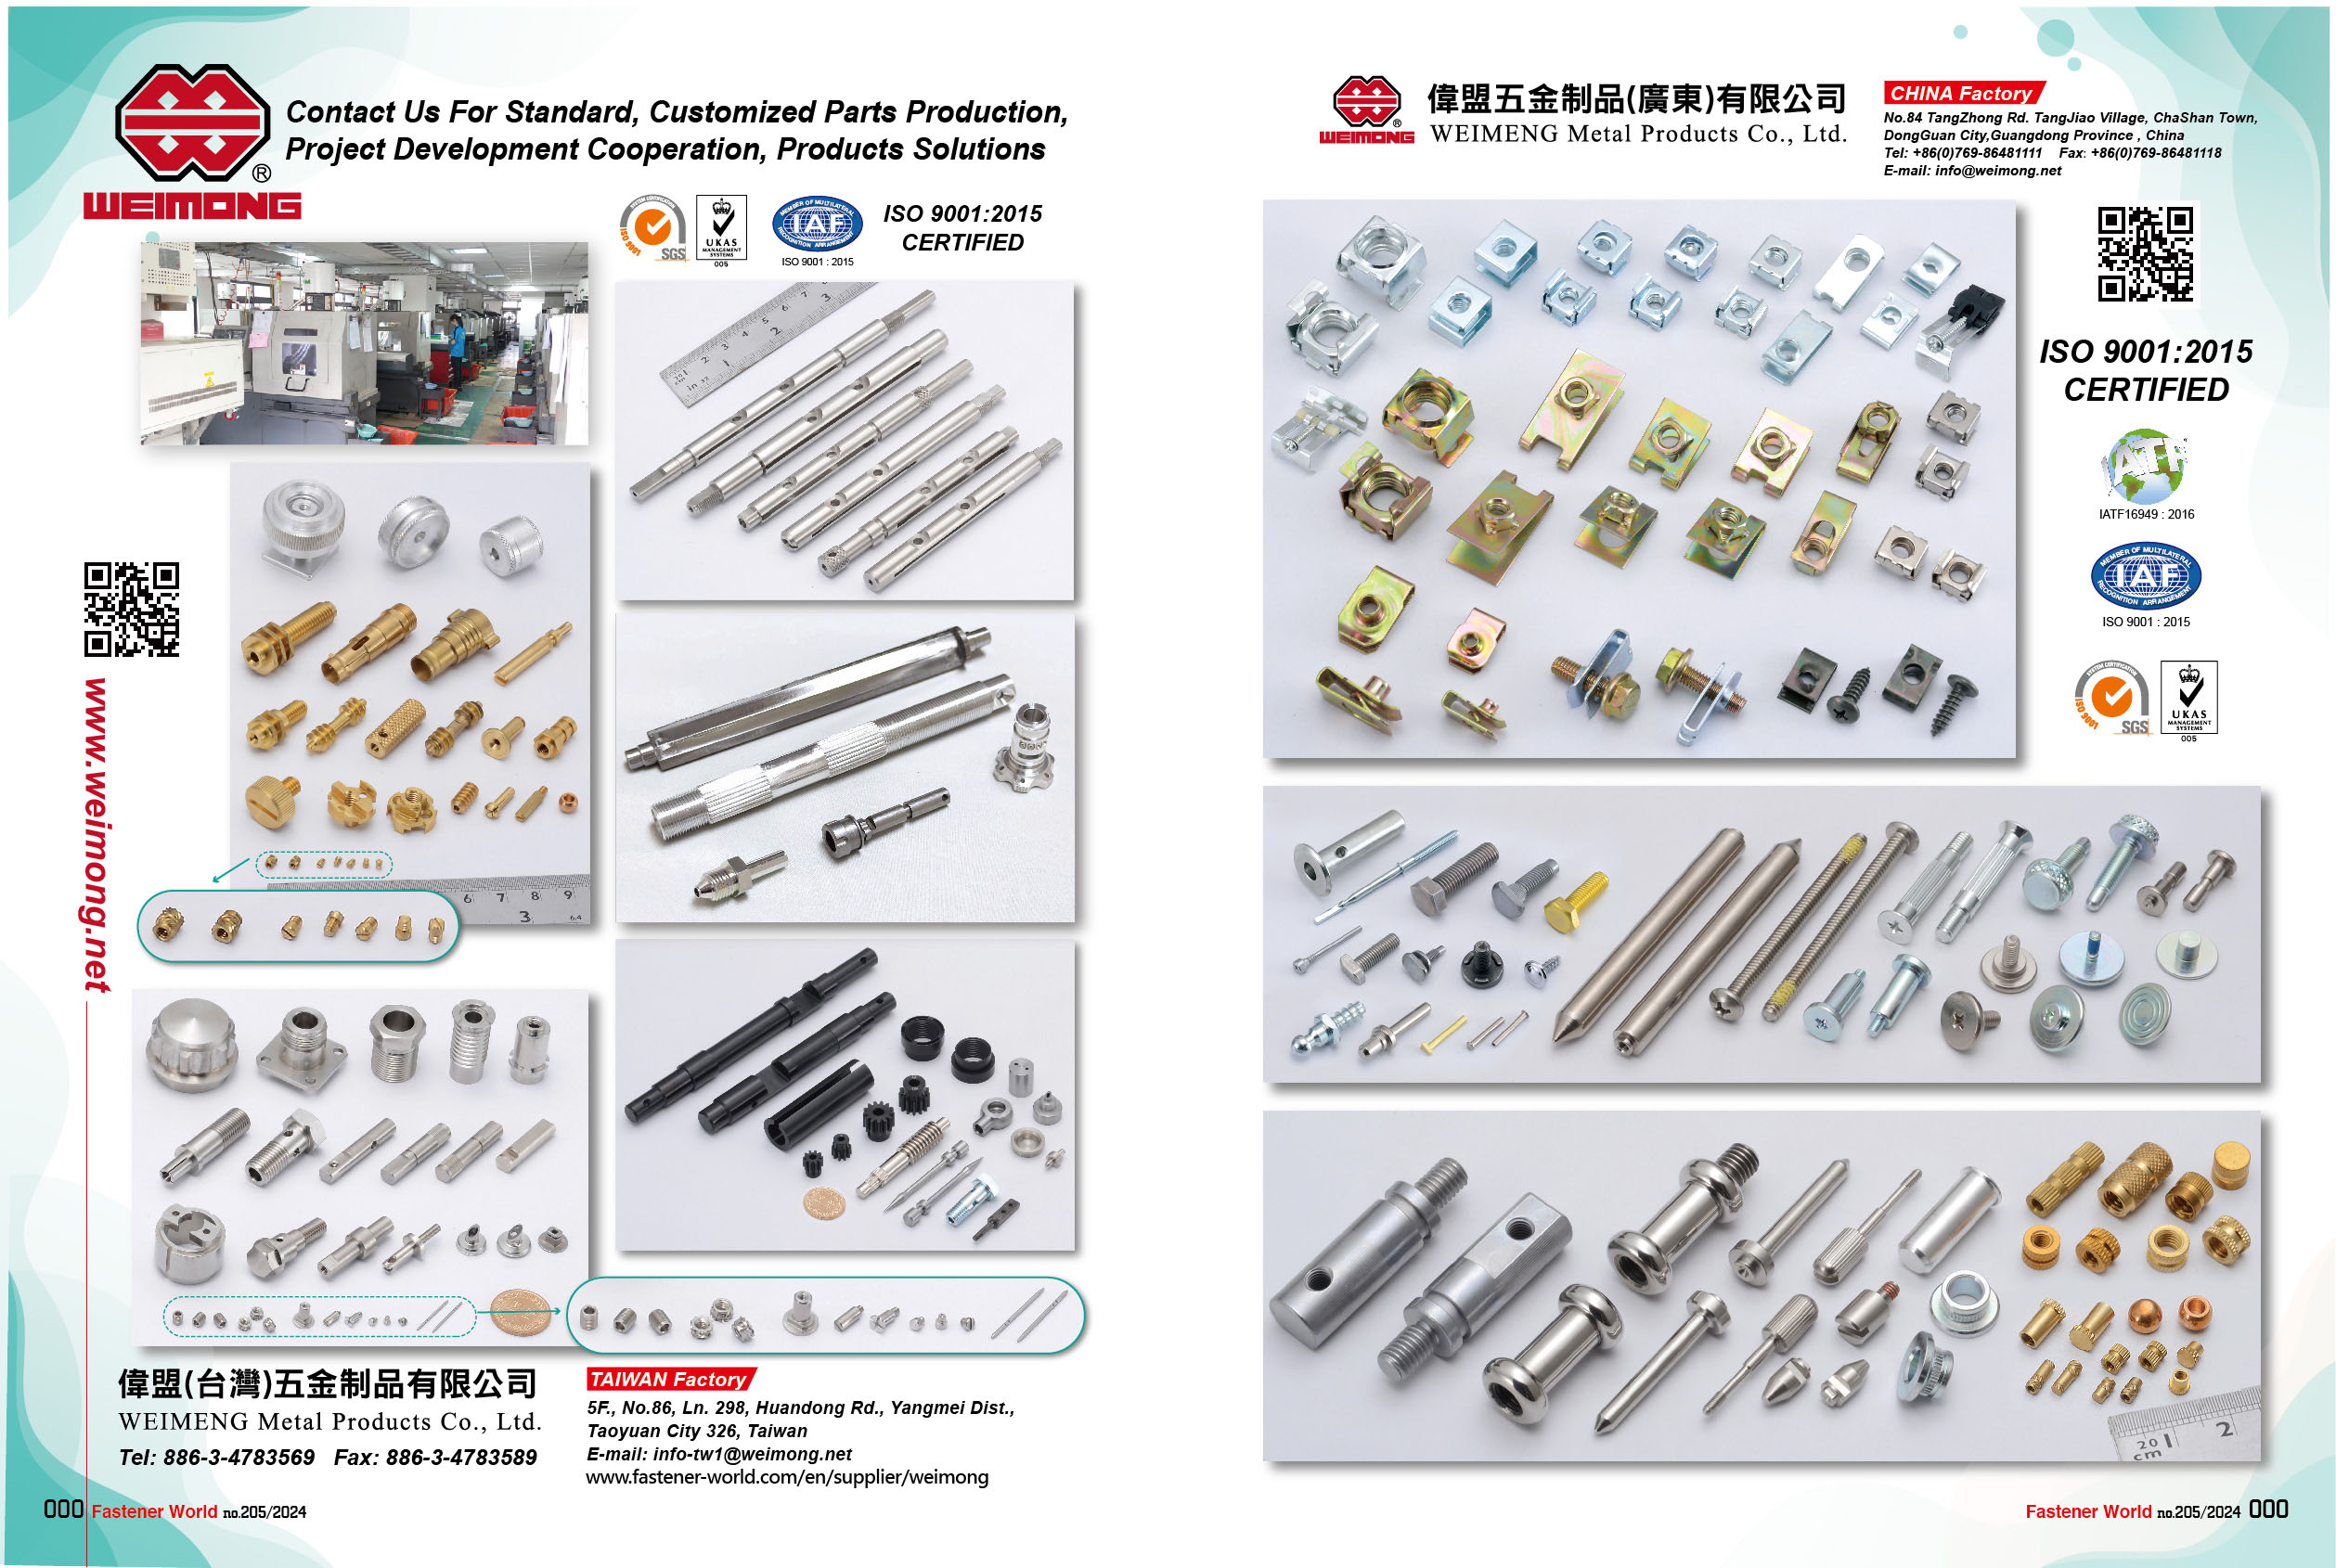 WEIMENG METAL PRODUCTS CO., LTD. , Machining Parts, Stamping Products, Cold Forging Products